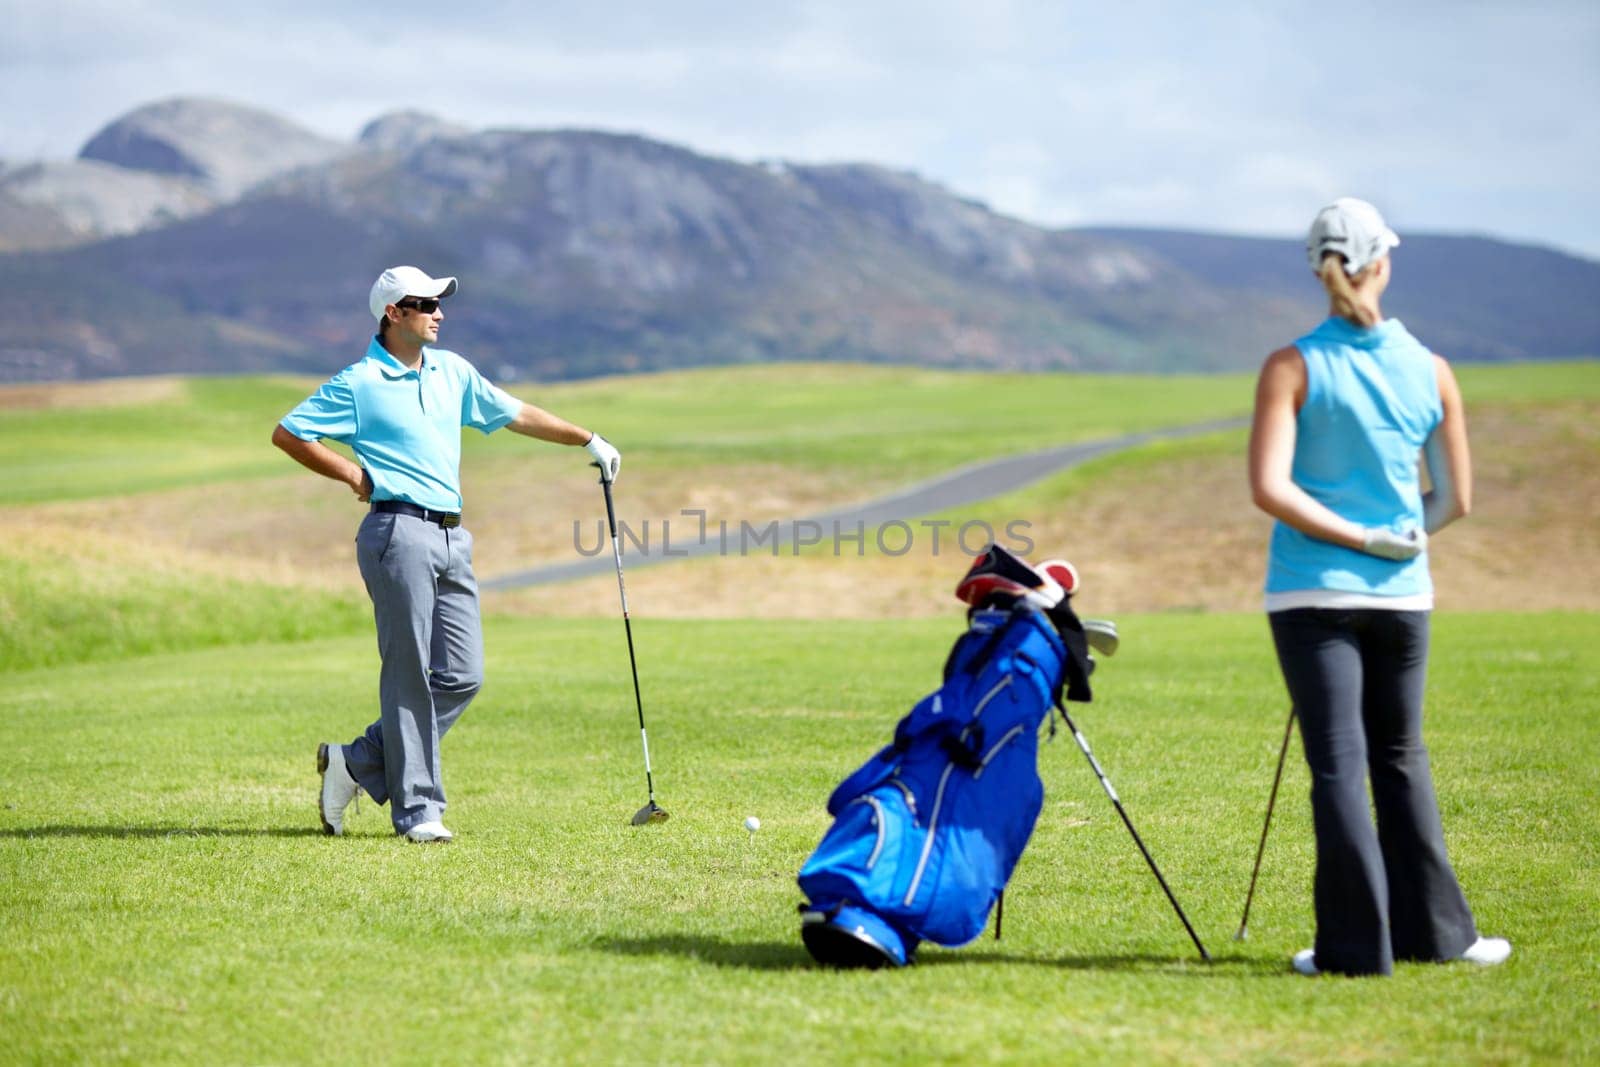 Couple, teamwork or golfer playing golf for fitness, workout or exercise together on green course field. Healthy people, woman golfing or athlete training in action or sports game driving with clubs.